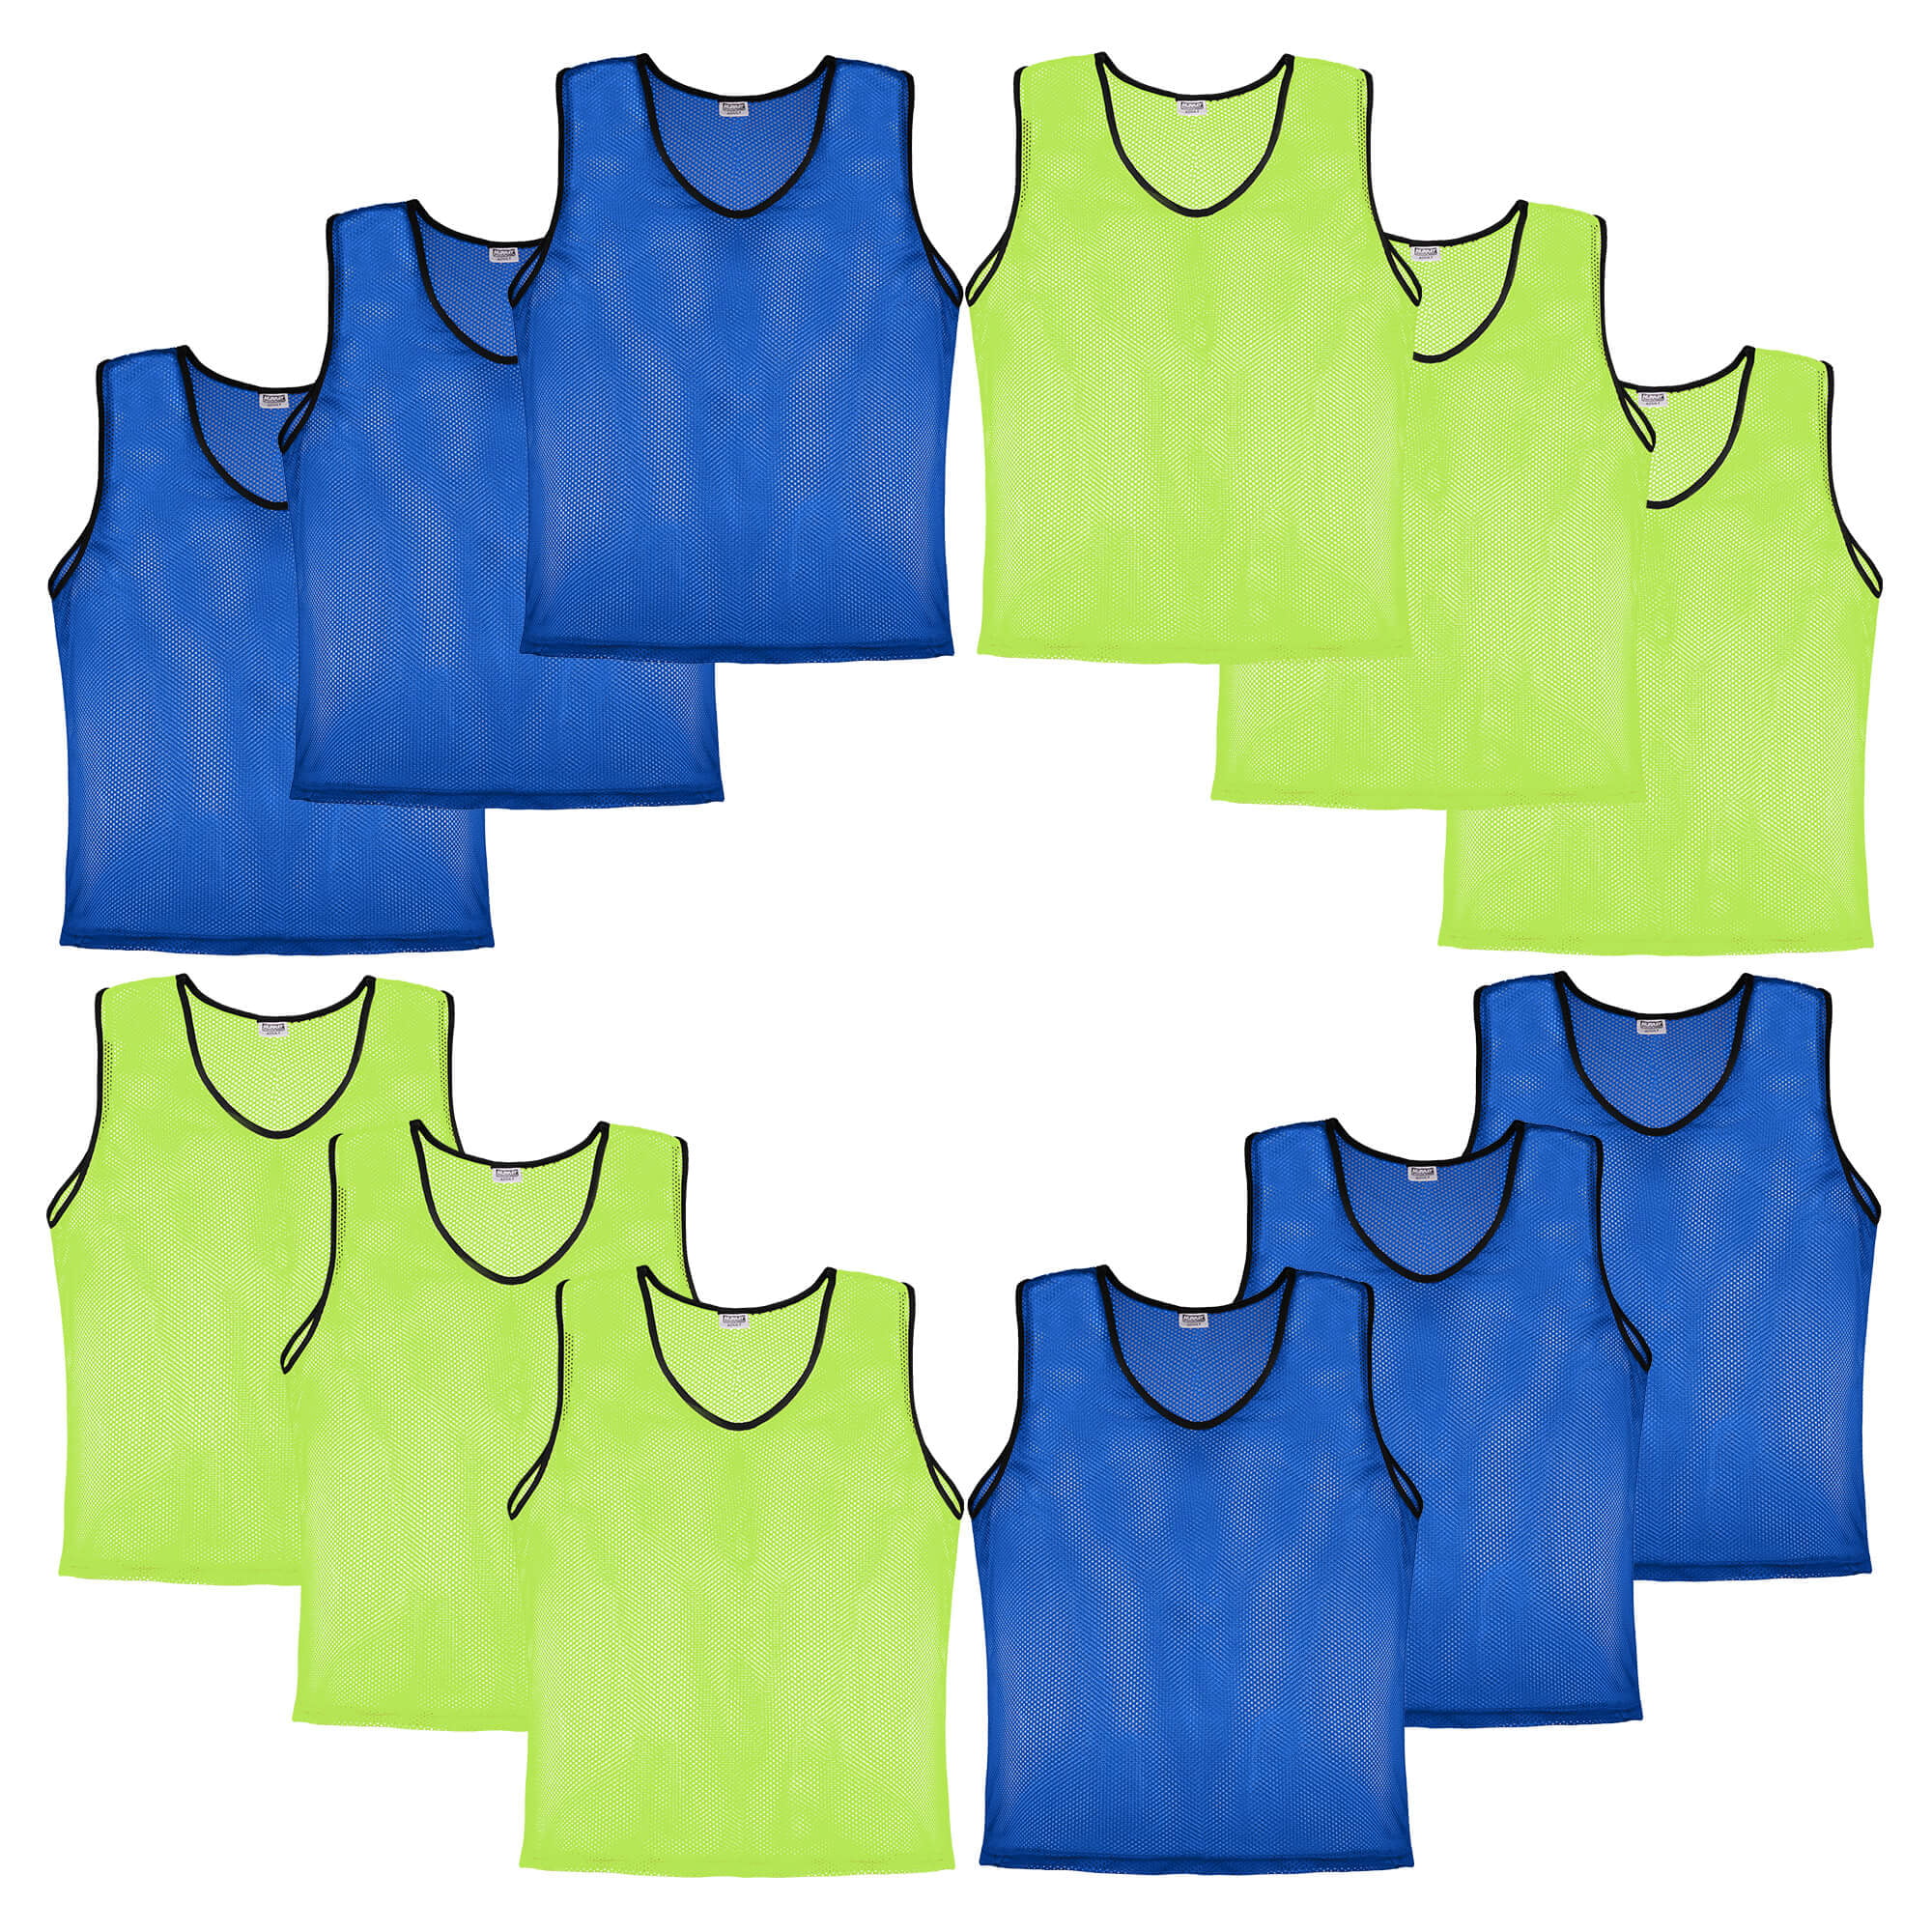 12 YELLOW YOUTH SOCCER BASKETBALL MESH SCRIMMAGE VESTS 